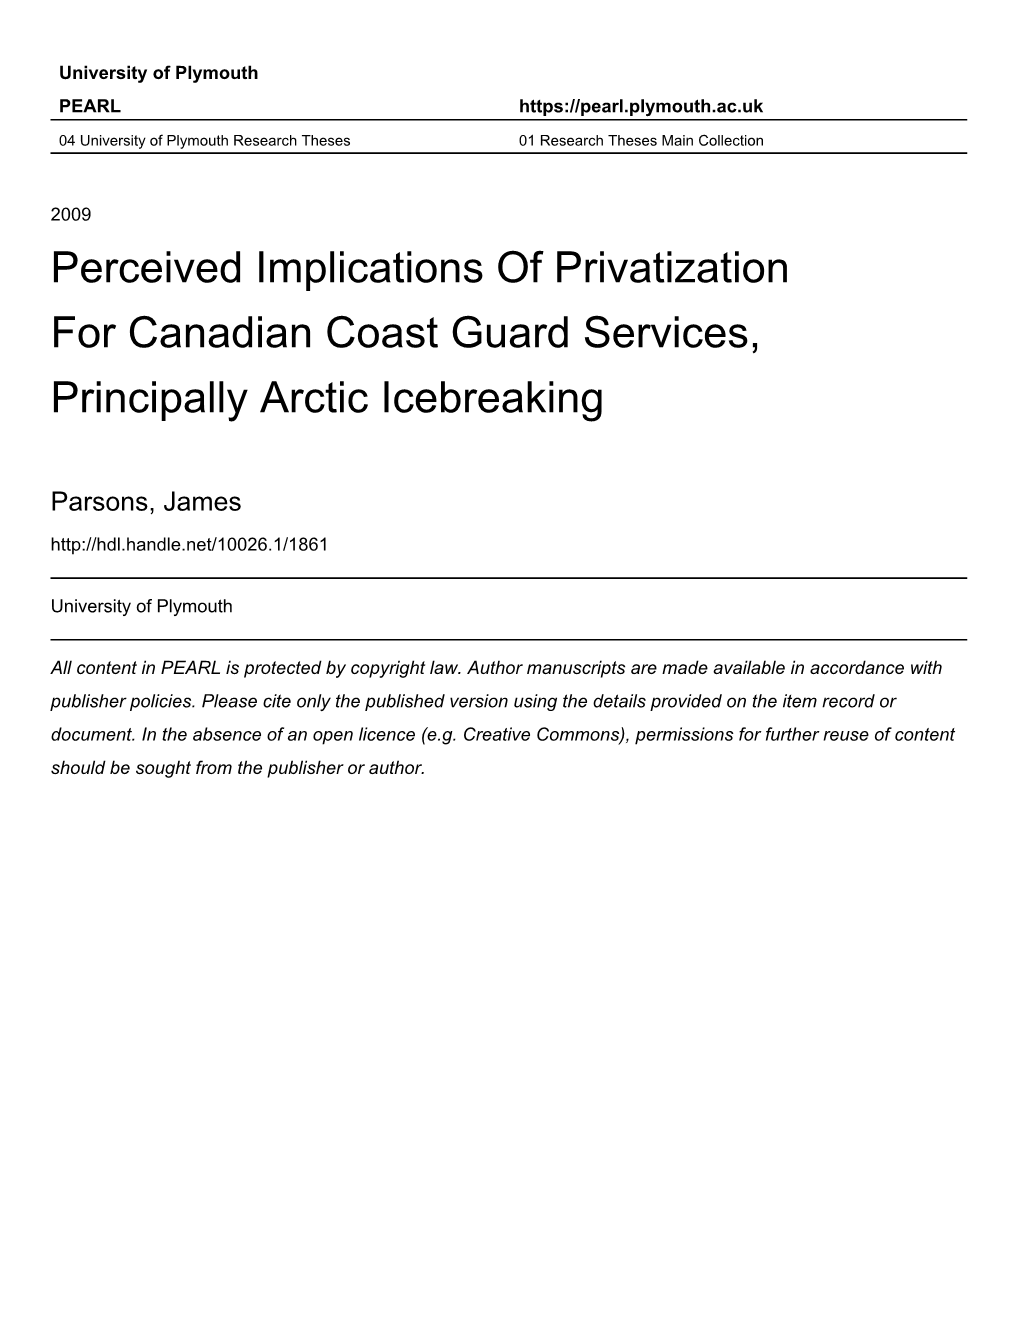 Perceived Implications of Privatization for Canadian Coast Guard Services, Principally Arctic Icebreaking